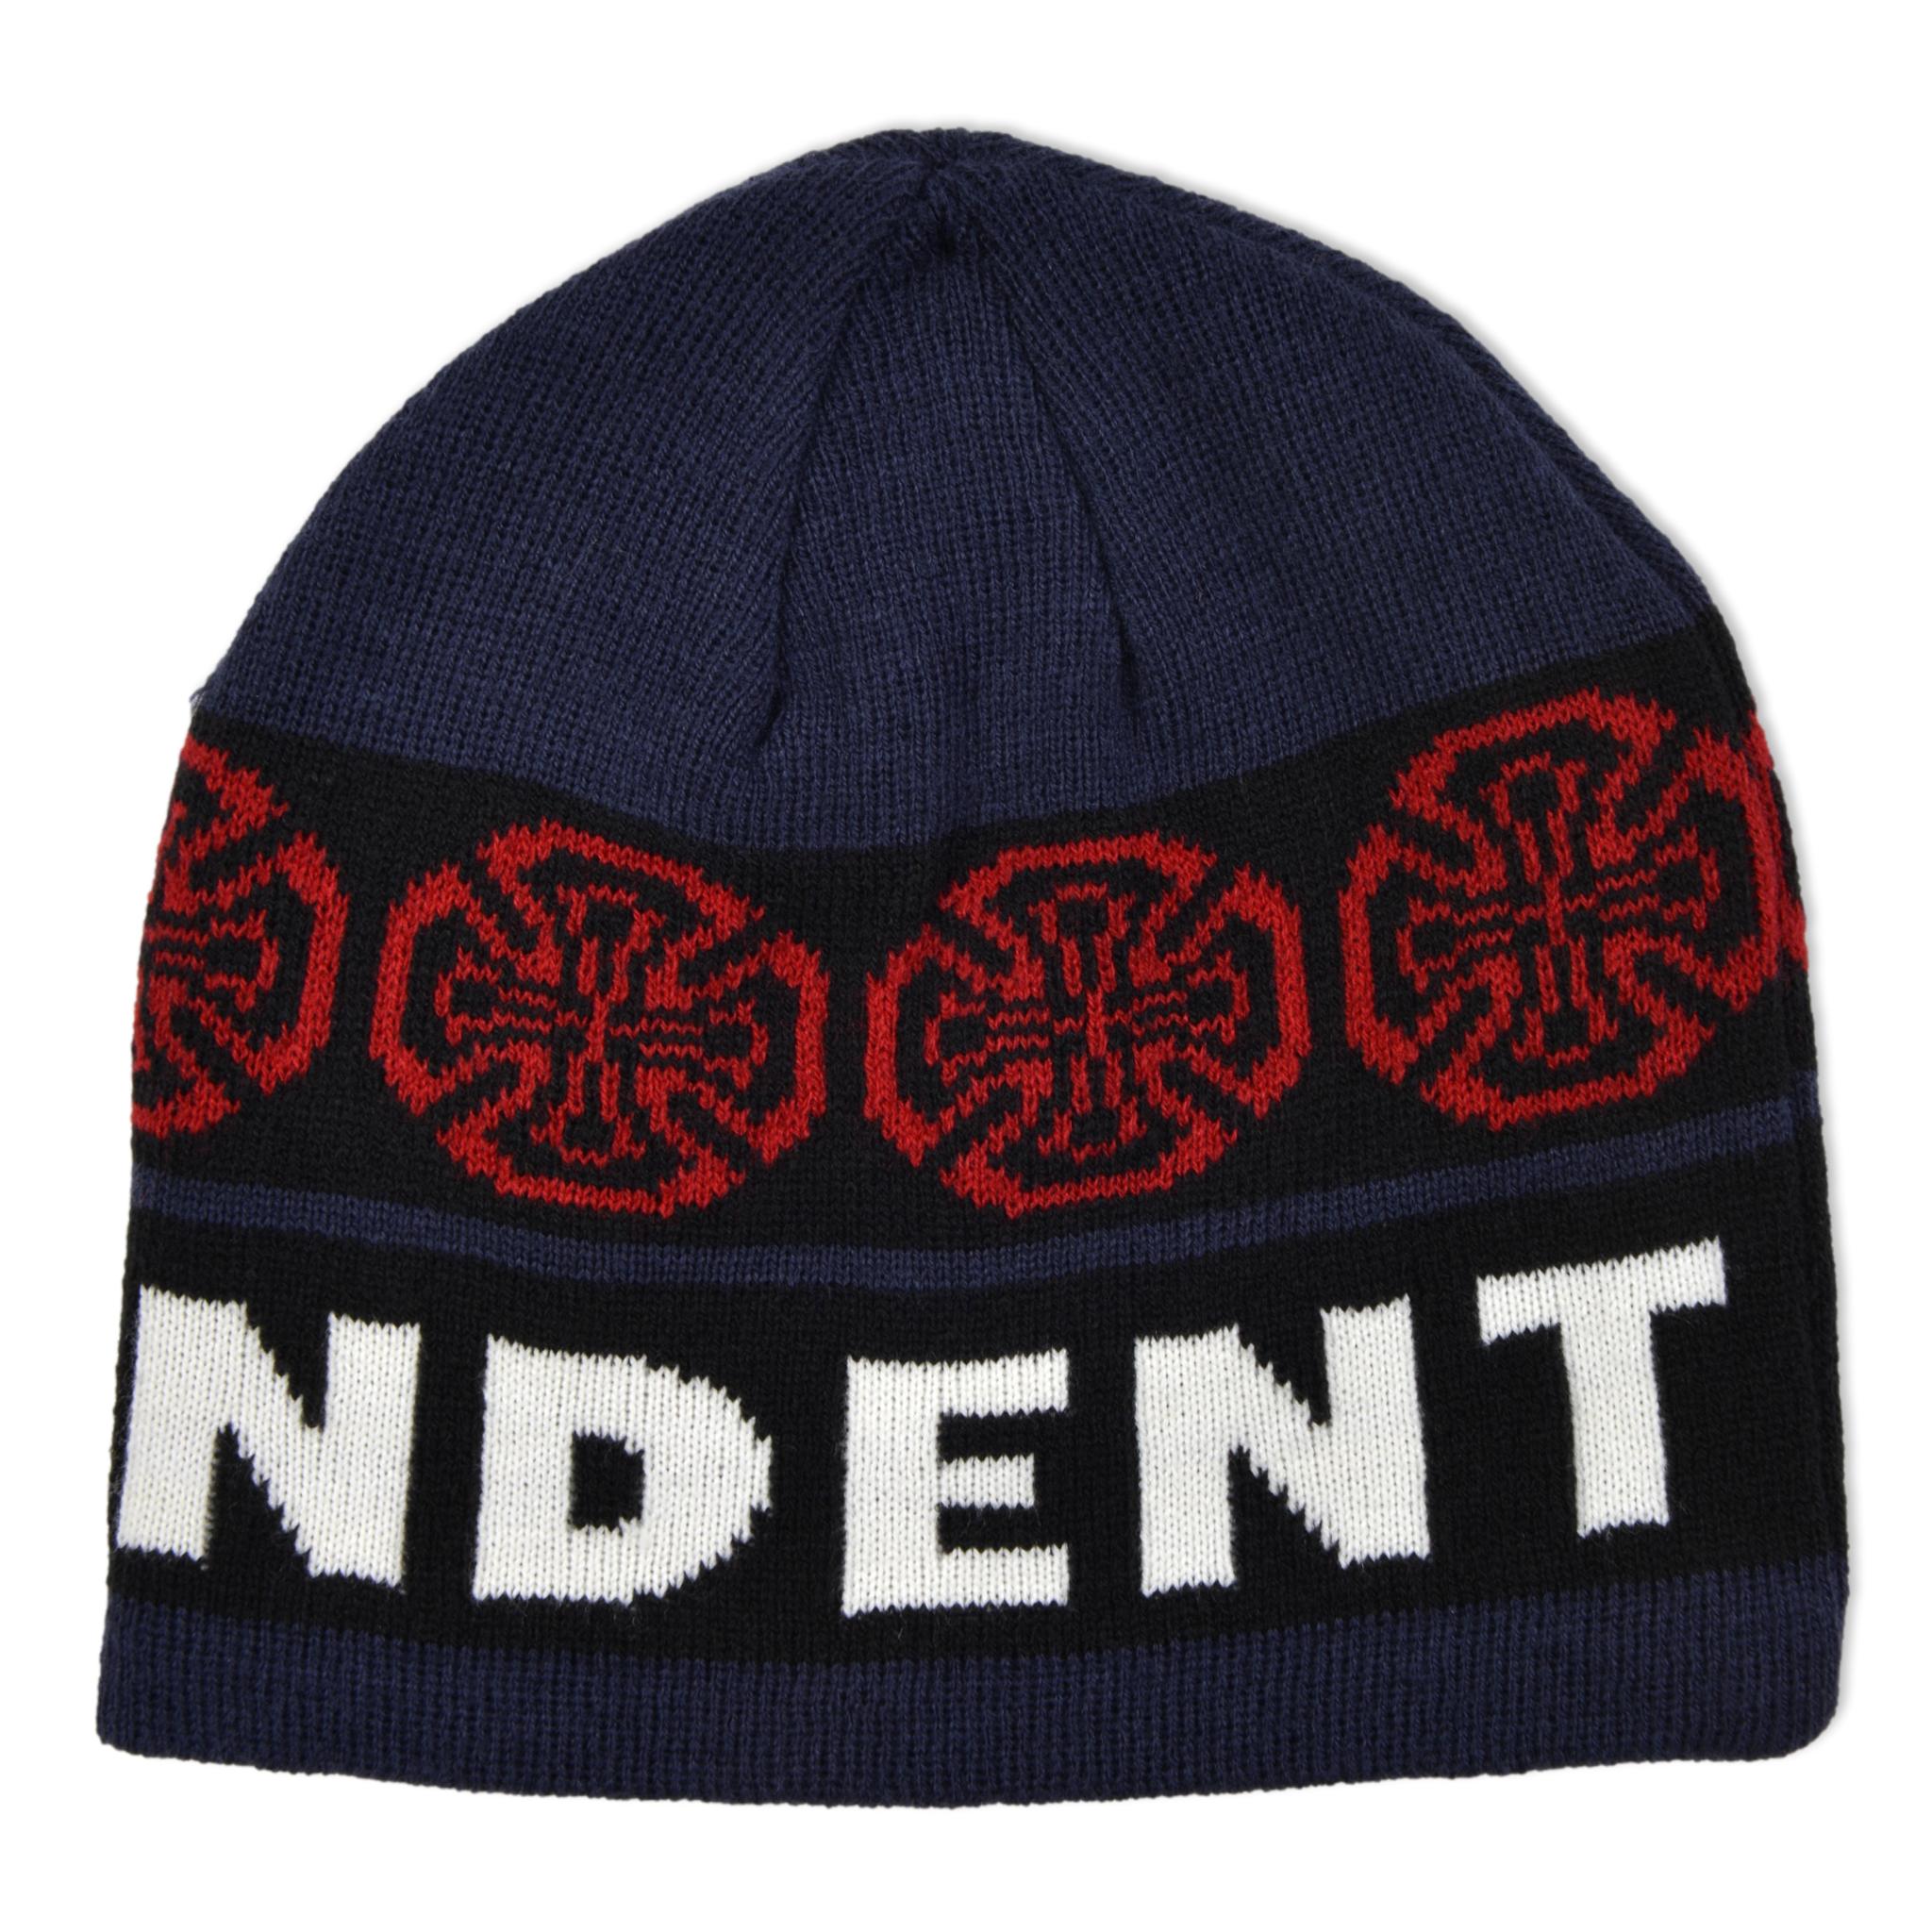 INDEPENDENT BLUE WOVEN CROSSES BEANIE